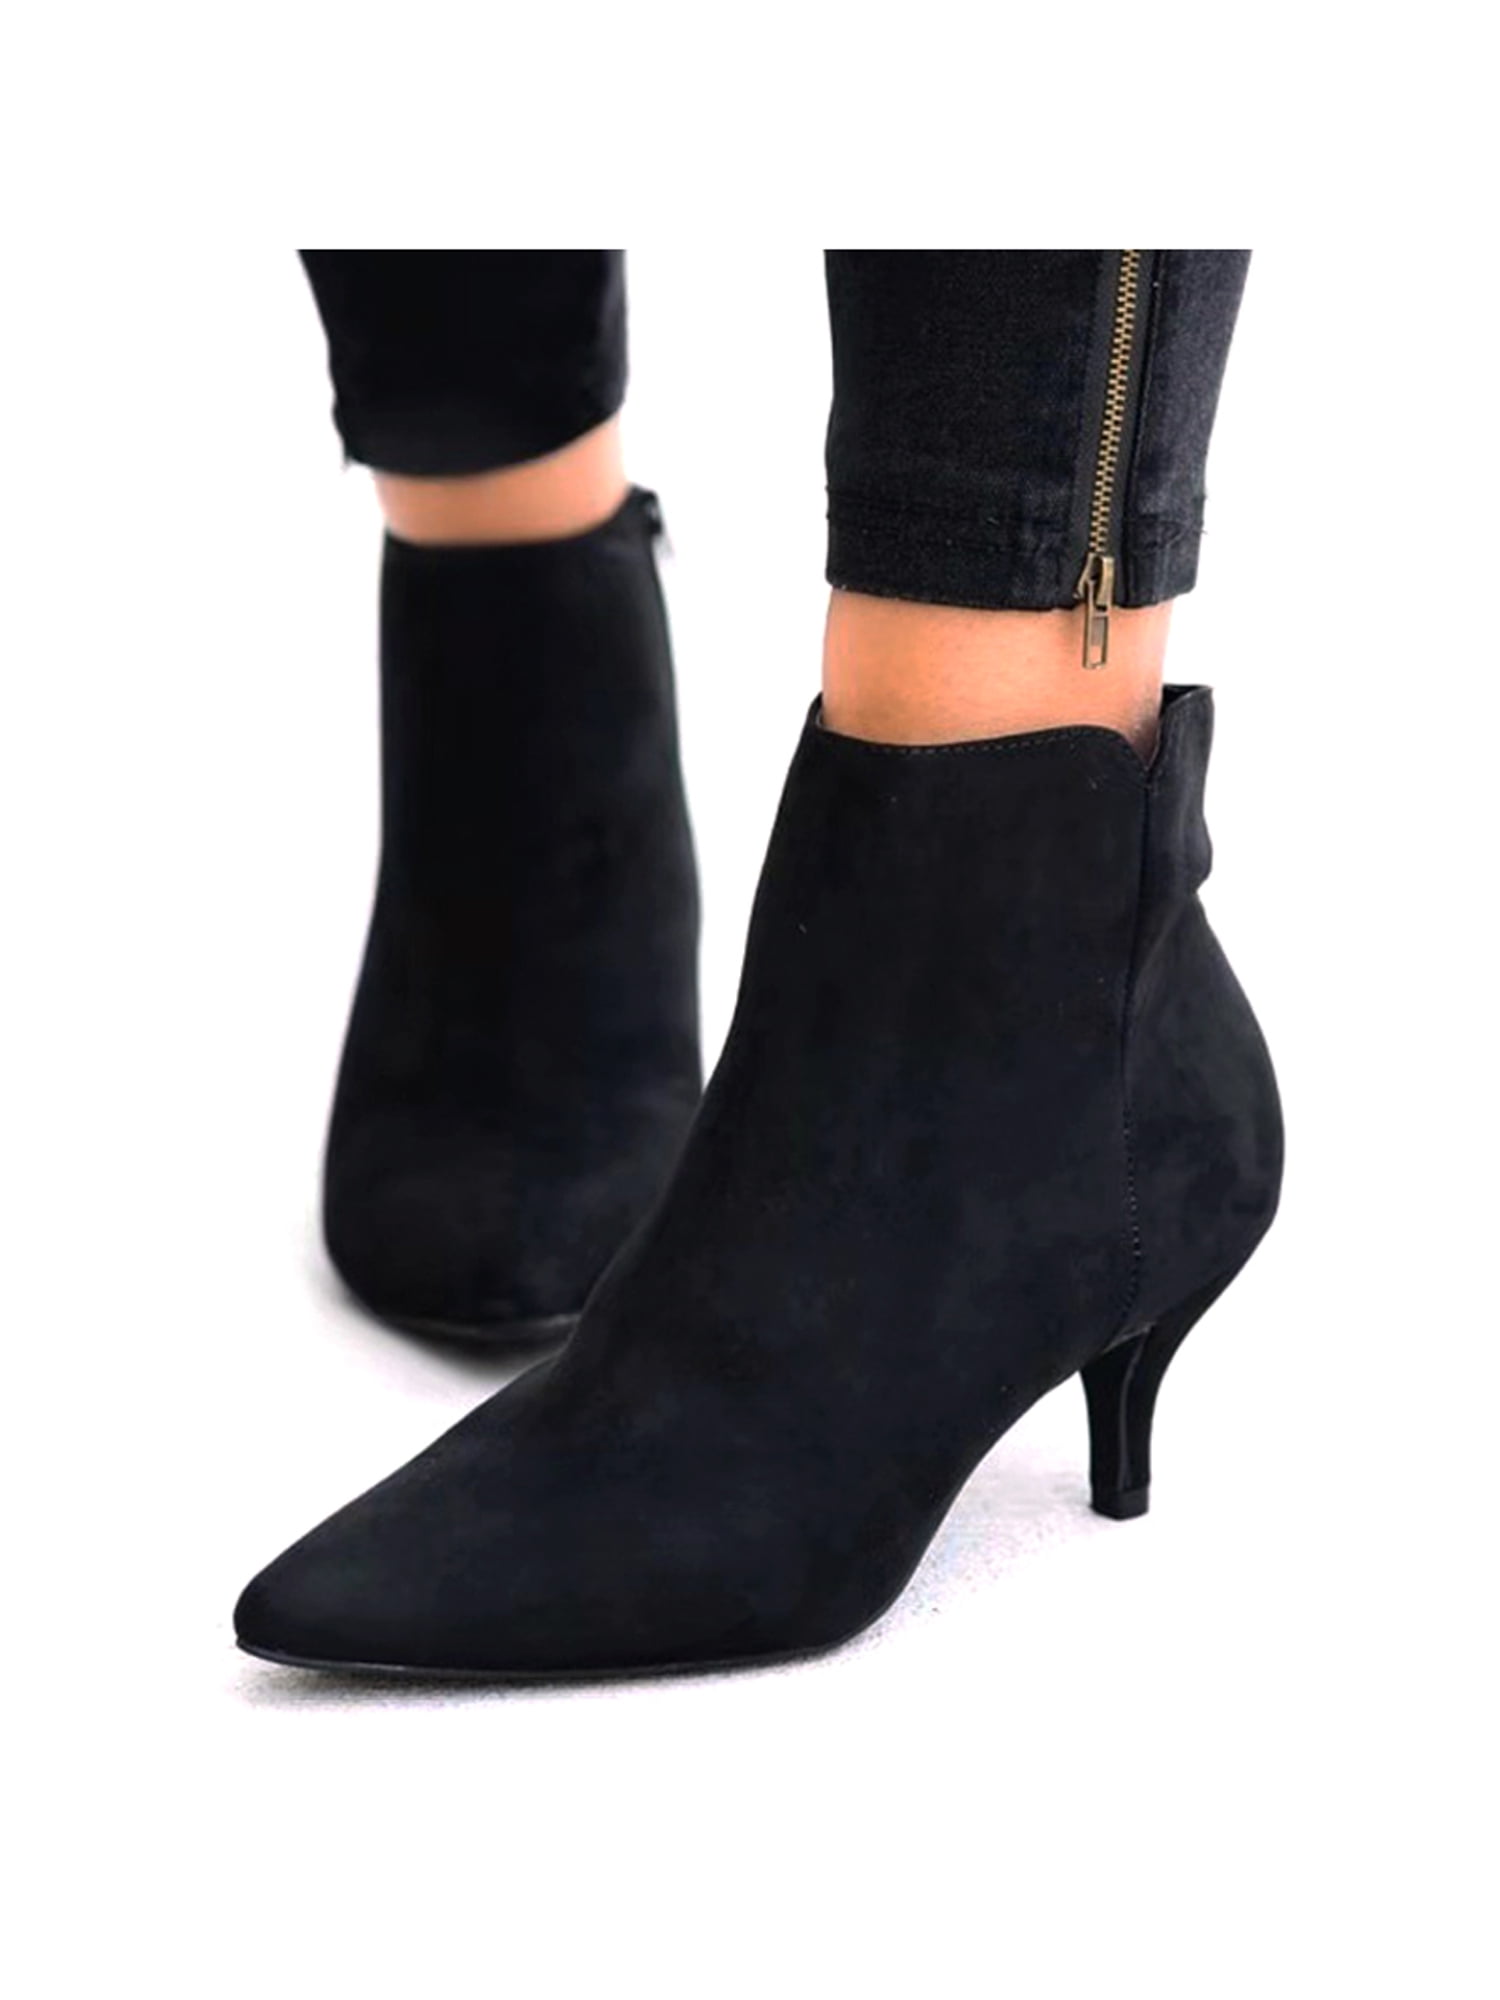 NEW BLACK SUEDE BLOCK ANKLE BOOTS WOMENS ZIP HIGH PARTY CHELSEA OFFICE SHOES UK 